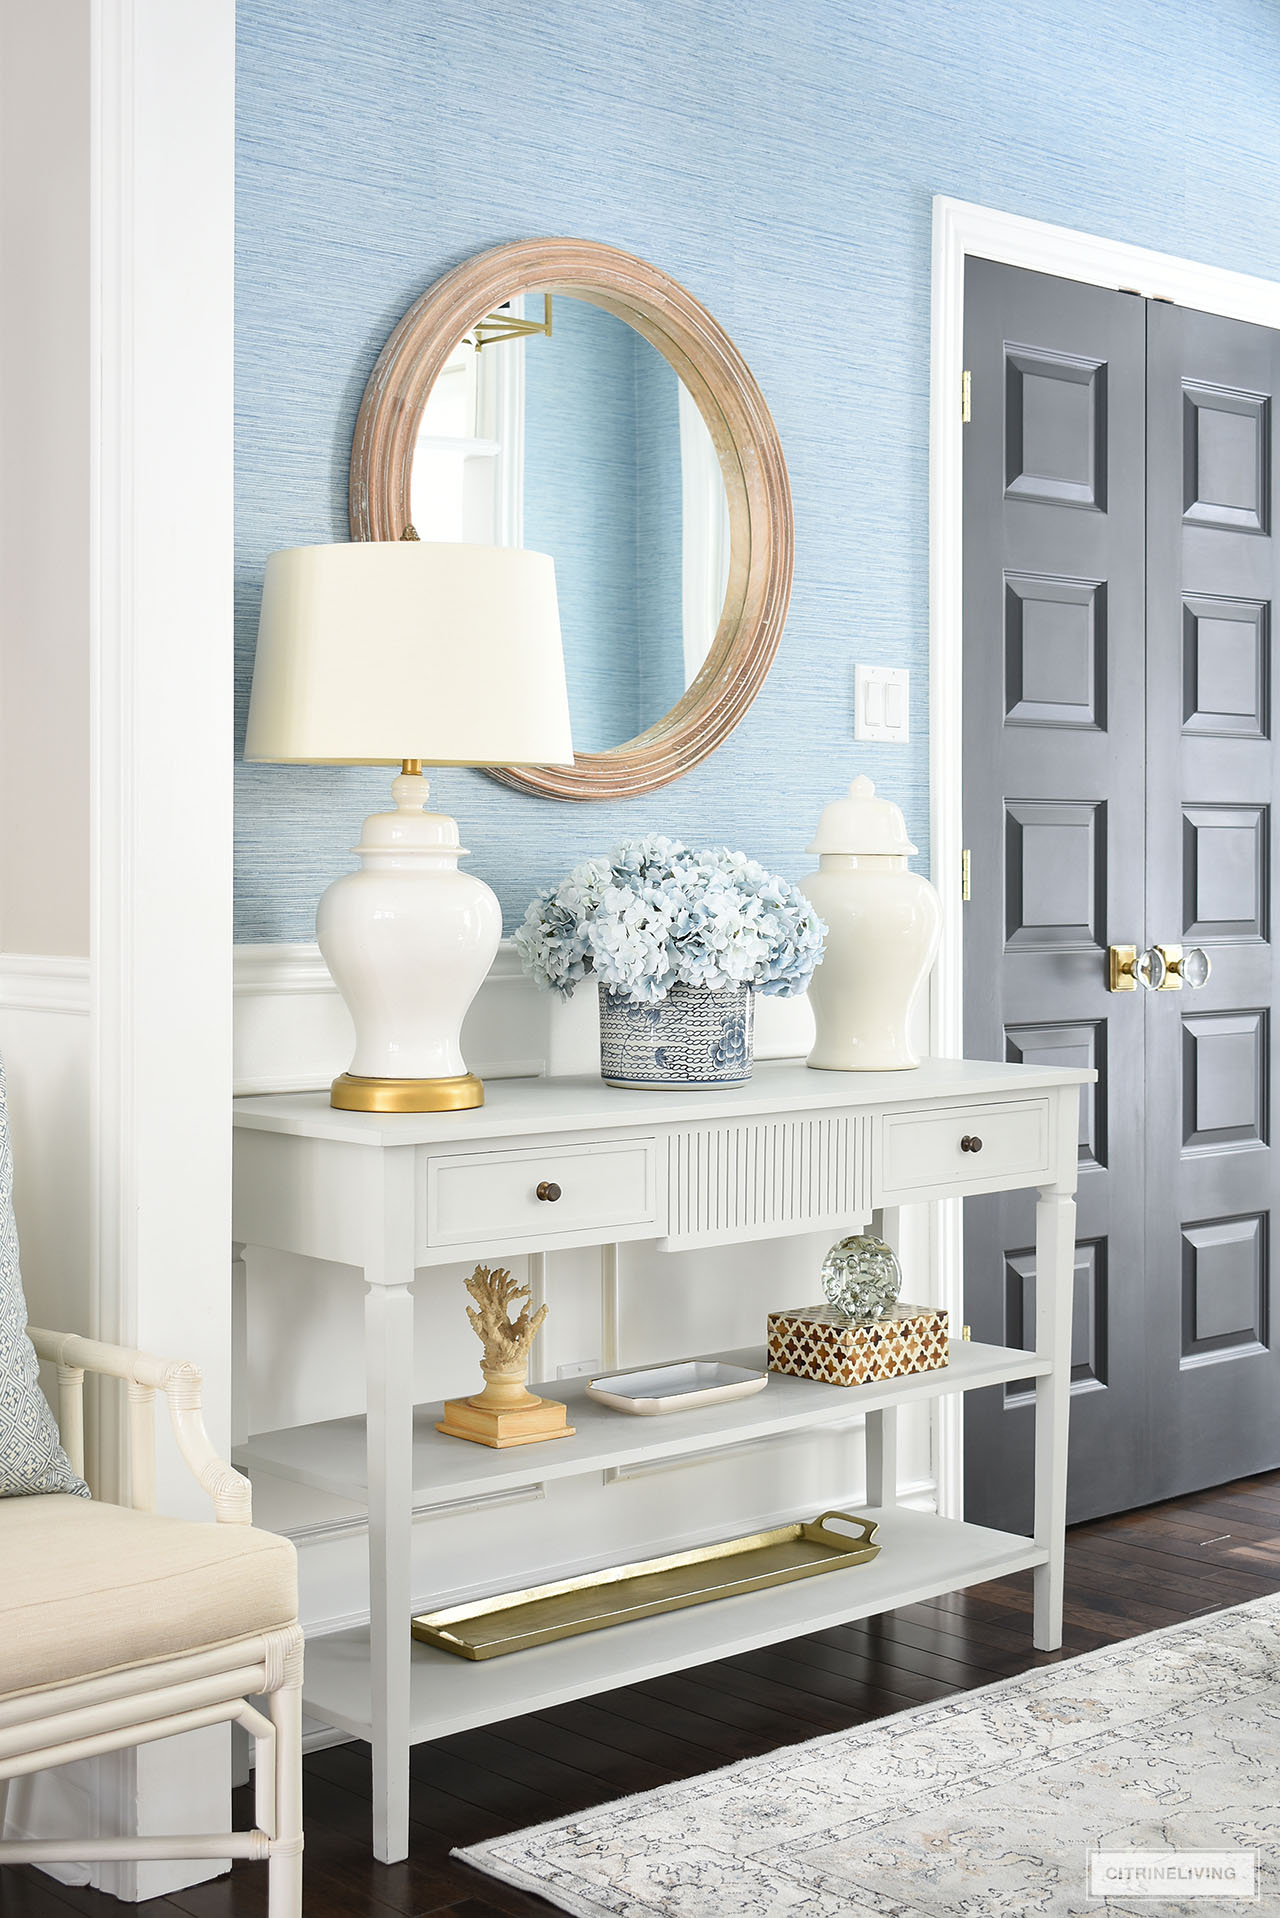 Console table styled with spring decor featuring light blue hydrangeas, white ginger jars, and natural closed accessories.